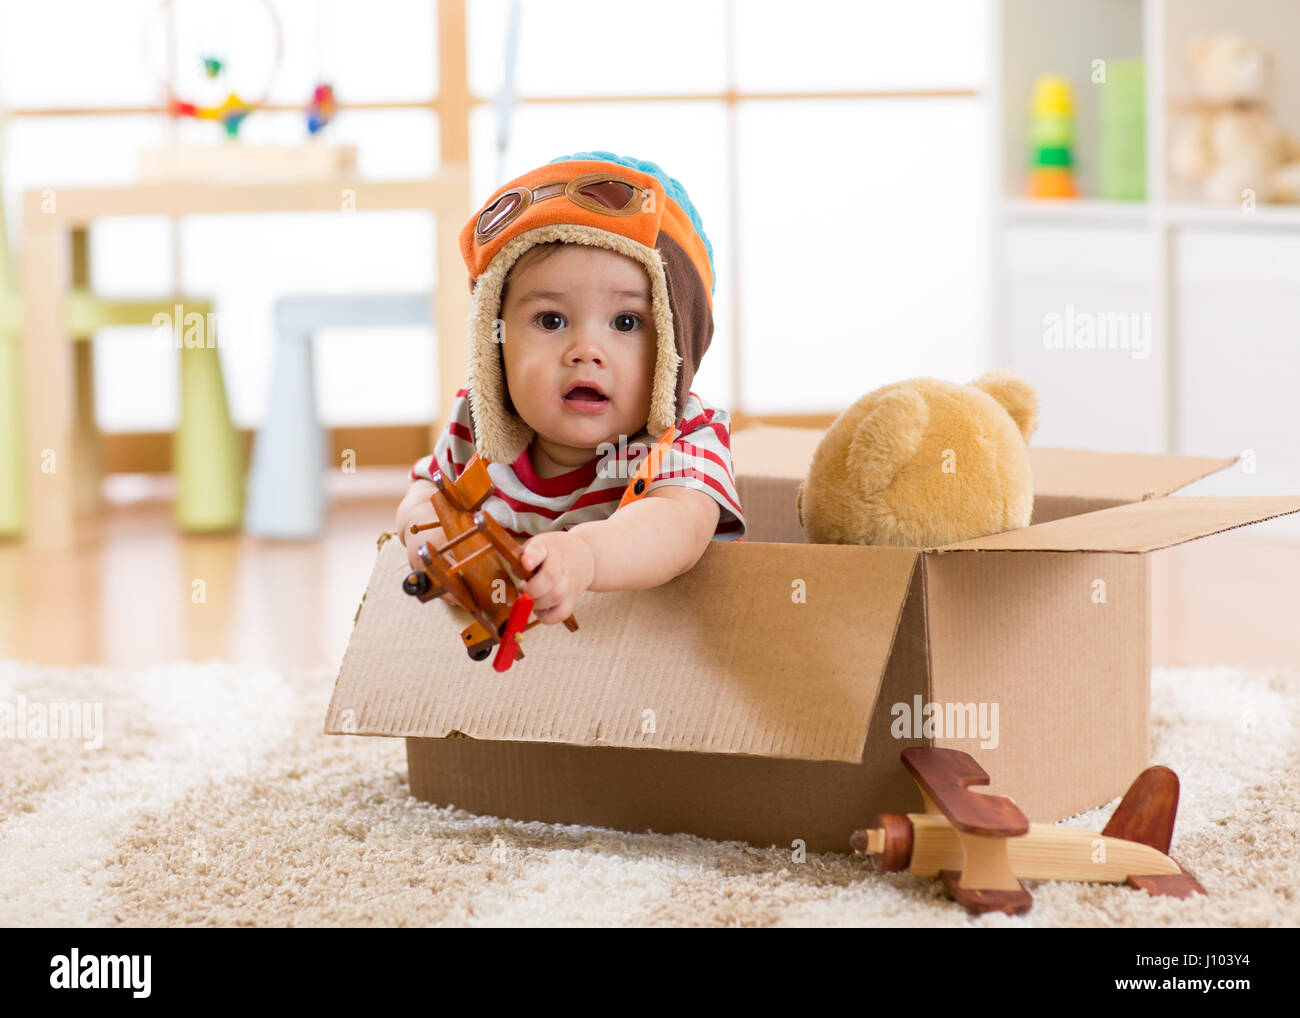 Pilot aviator baby boy with teddy bear toy and planes plays in cardboard box Stock Photo